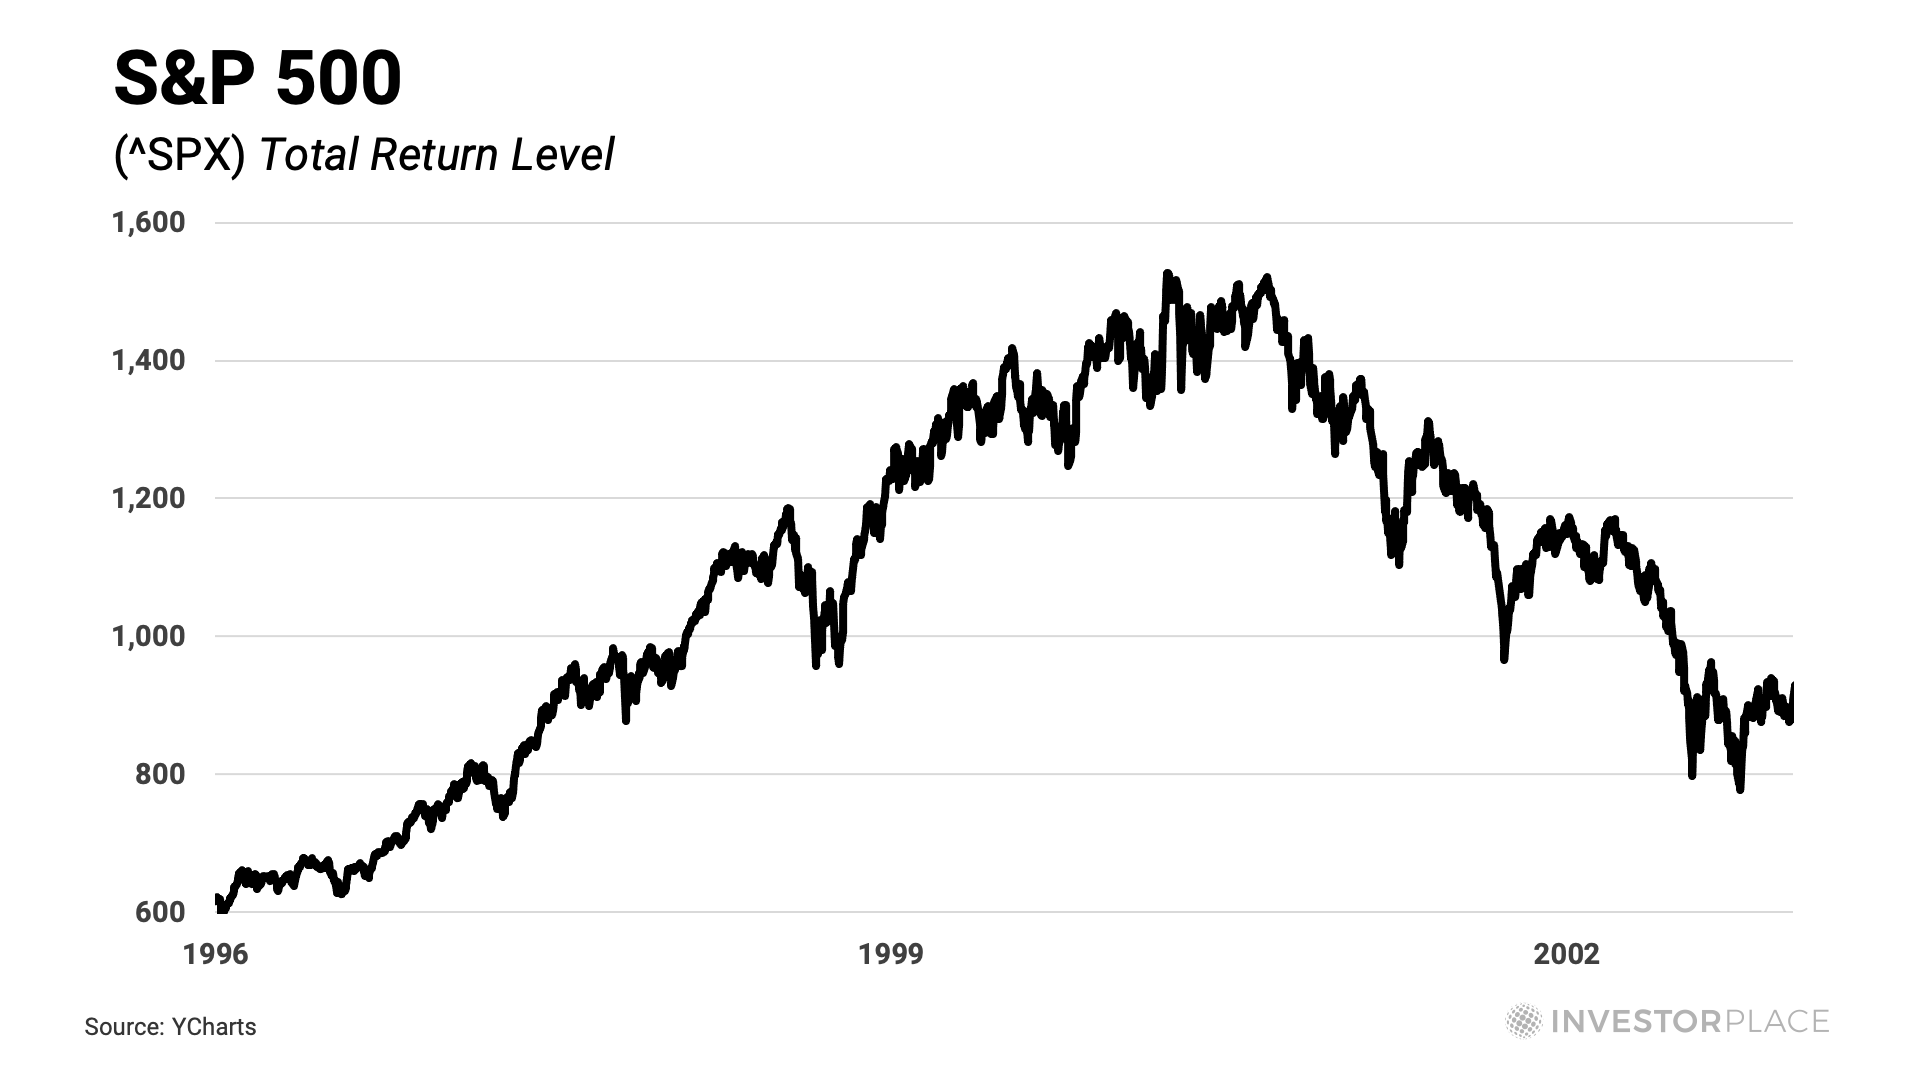 S&P 500 total return from 1996 through 2002